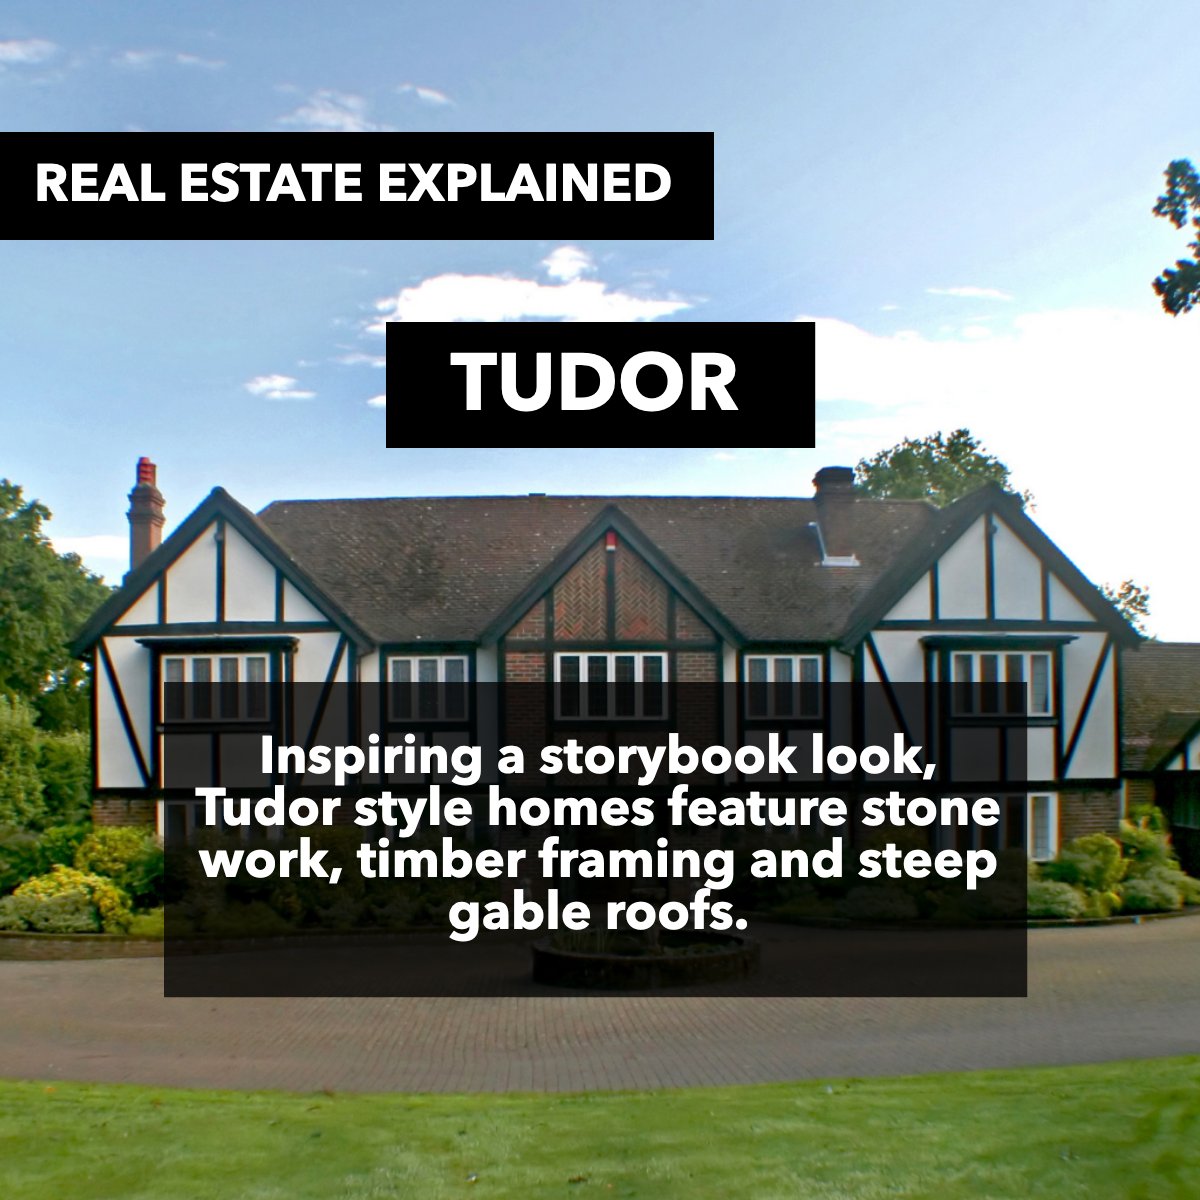 Charming, intricate, and classic, Tudor-style homes have been an iconic home style in North America since the 19th century. 🏘️

#tudorstylearchitecture     #tudorstylehome     #styletudors
#mitakapadia #realestate #realestateagent #remax #homebuying #homeselling